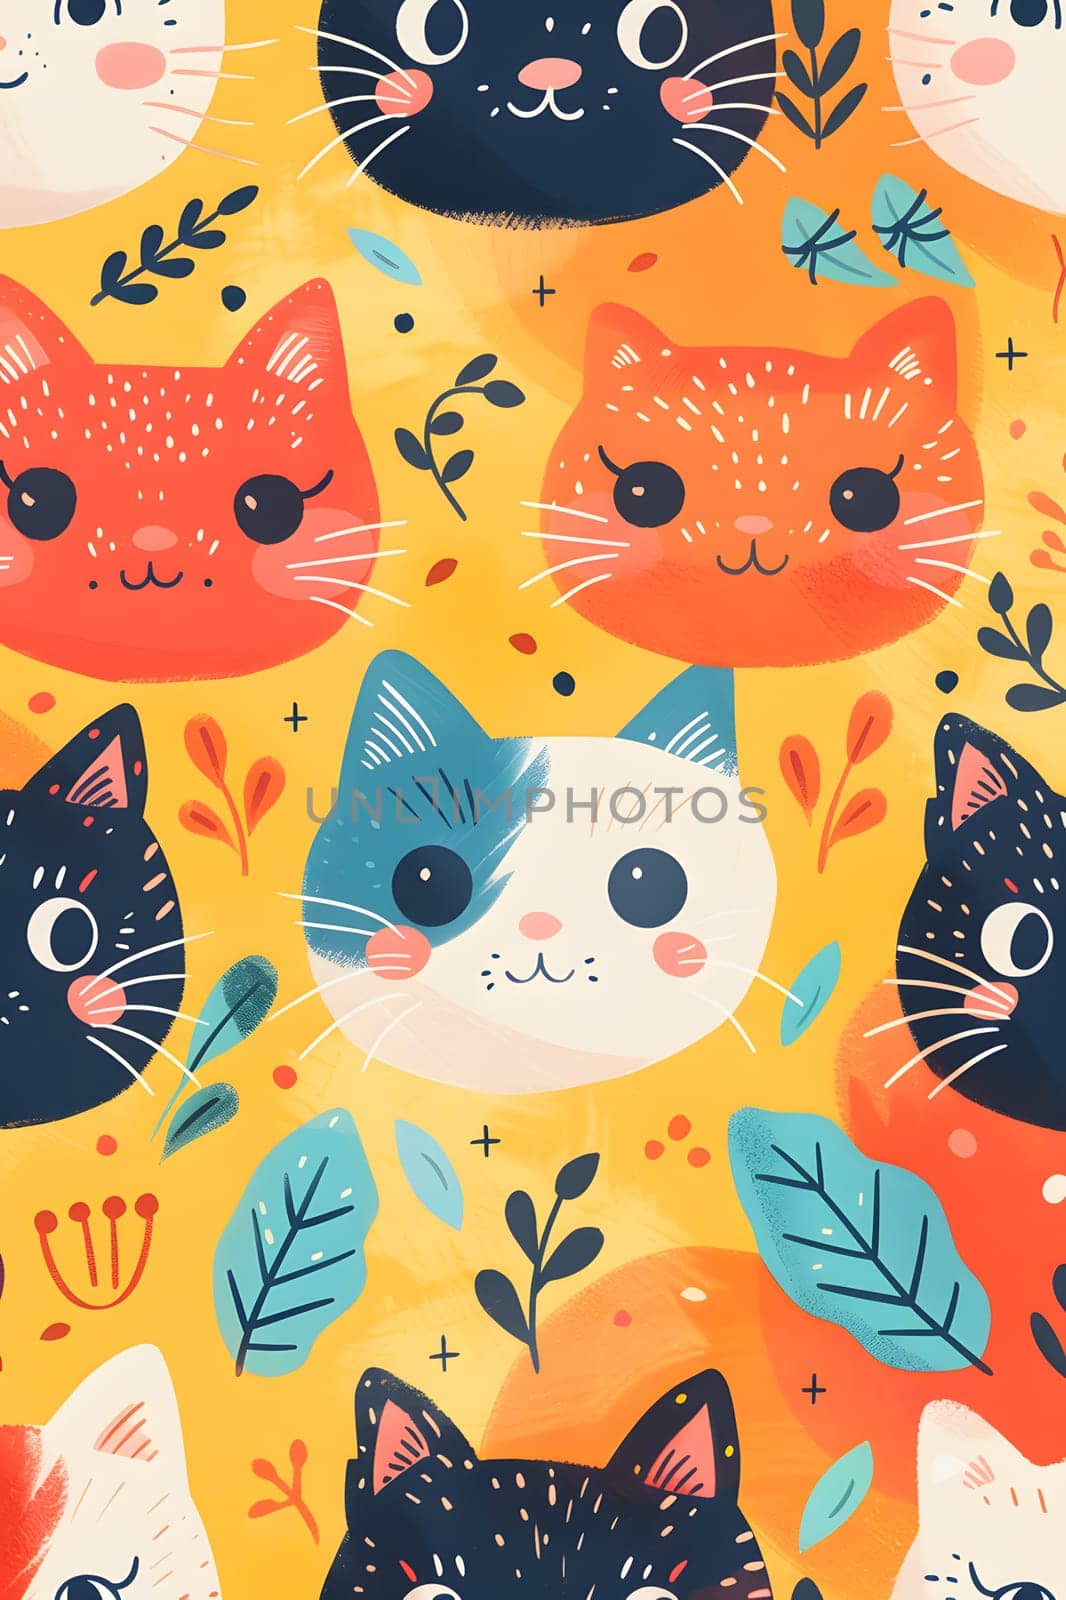 A textile featuring a pattern of white and orange cats among green leaves on a vibrant yellow background. This art piece showcases the beauty of Felidae, a vertebrate organism